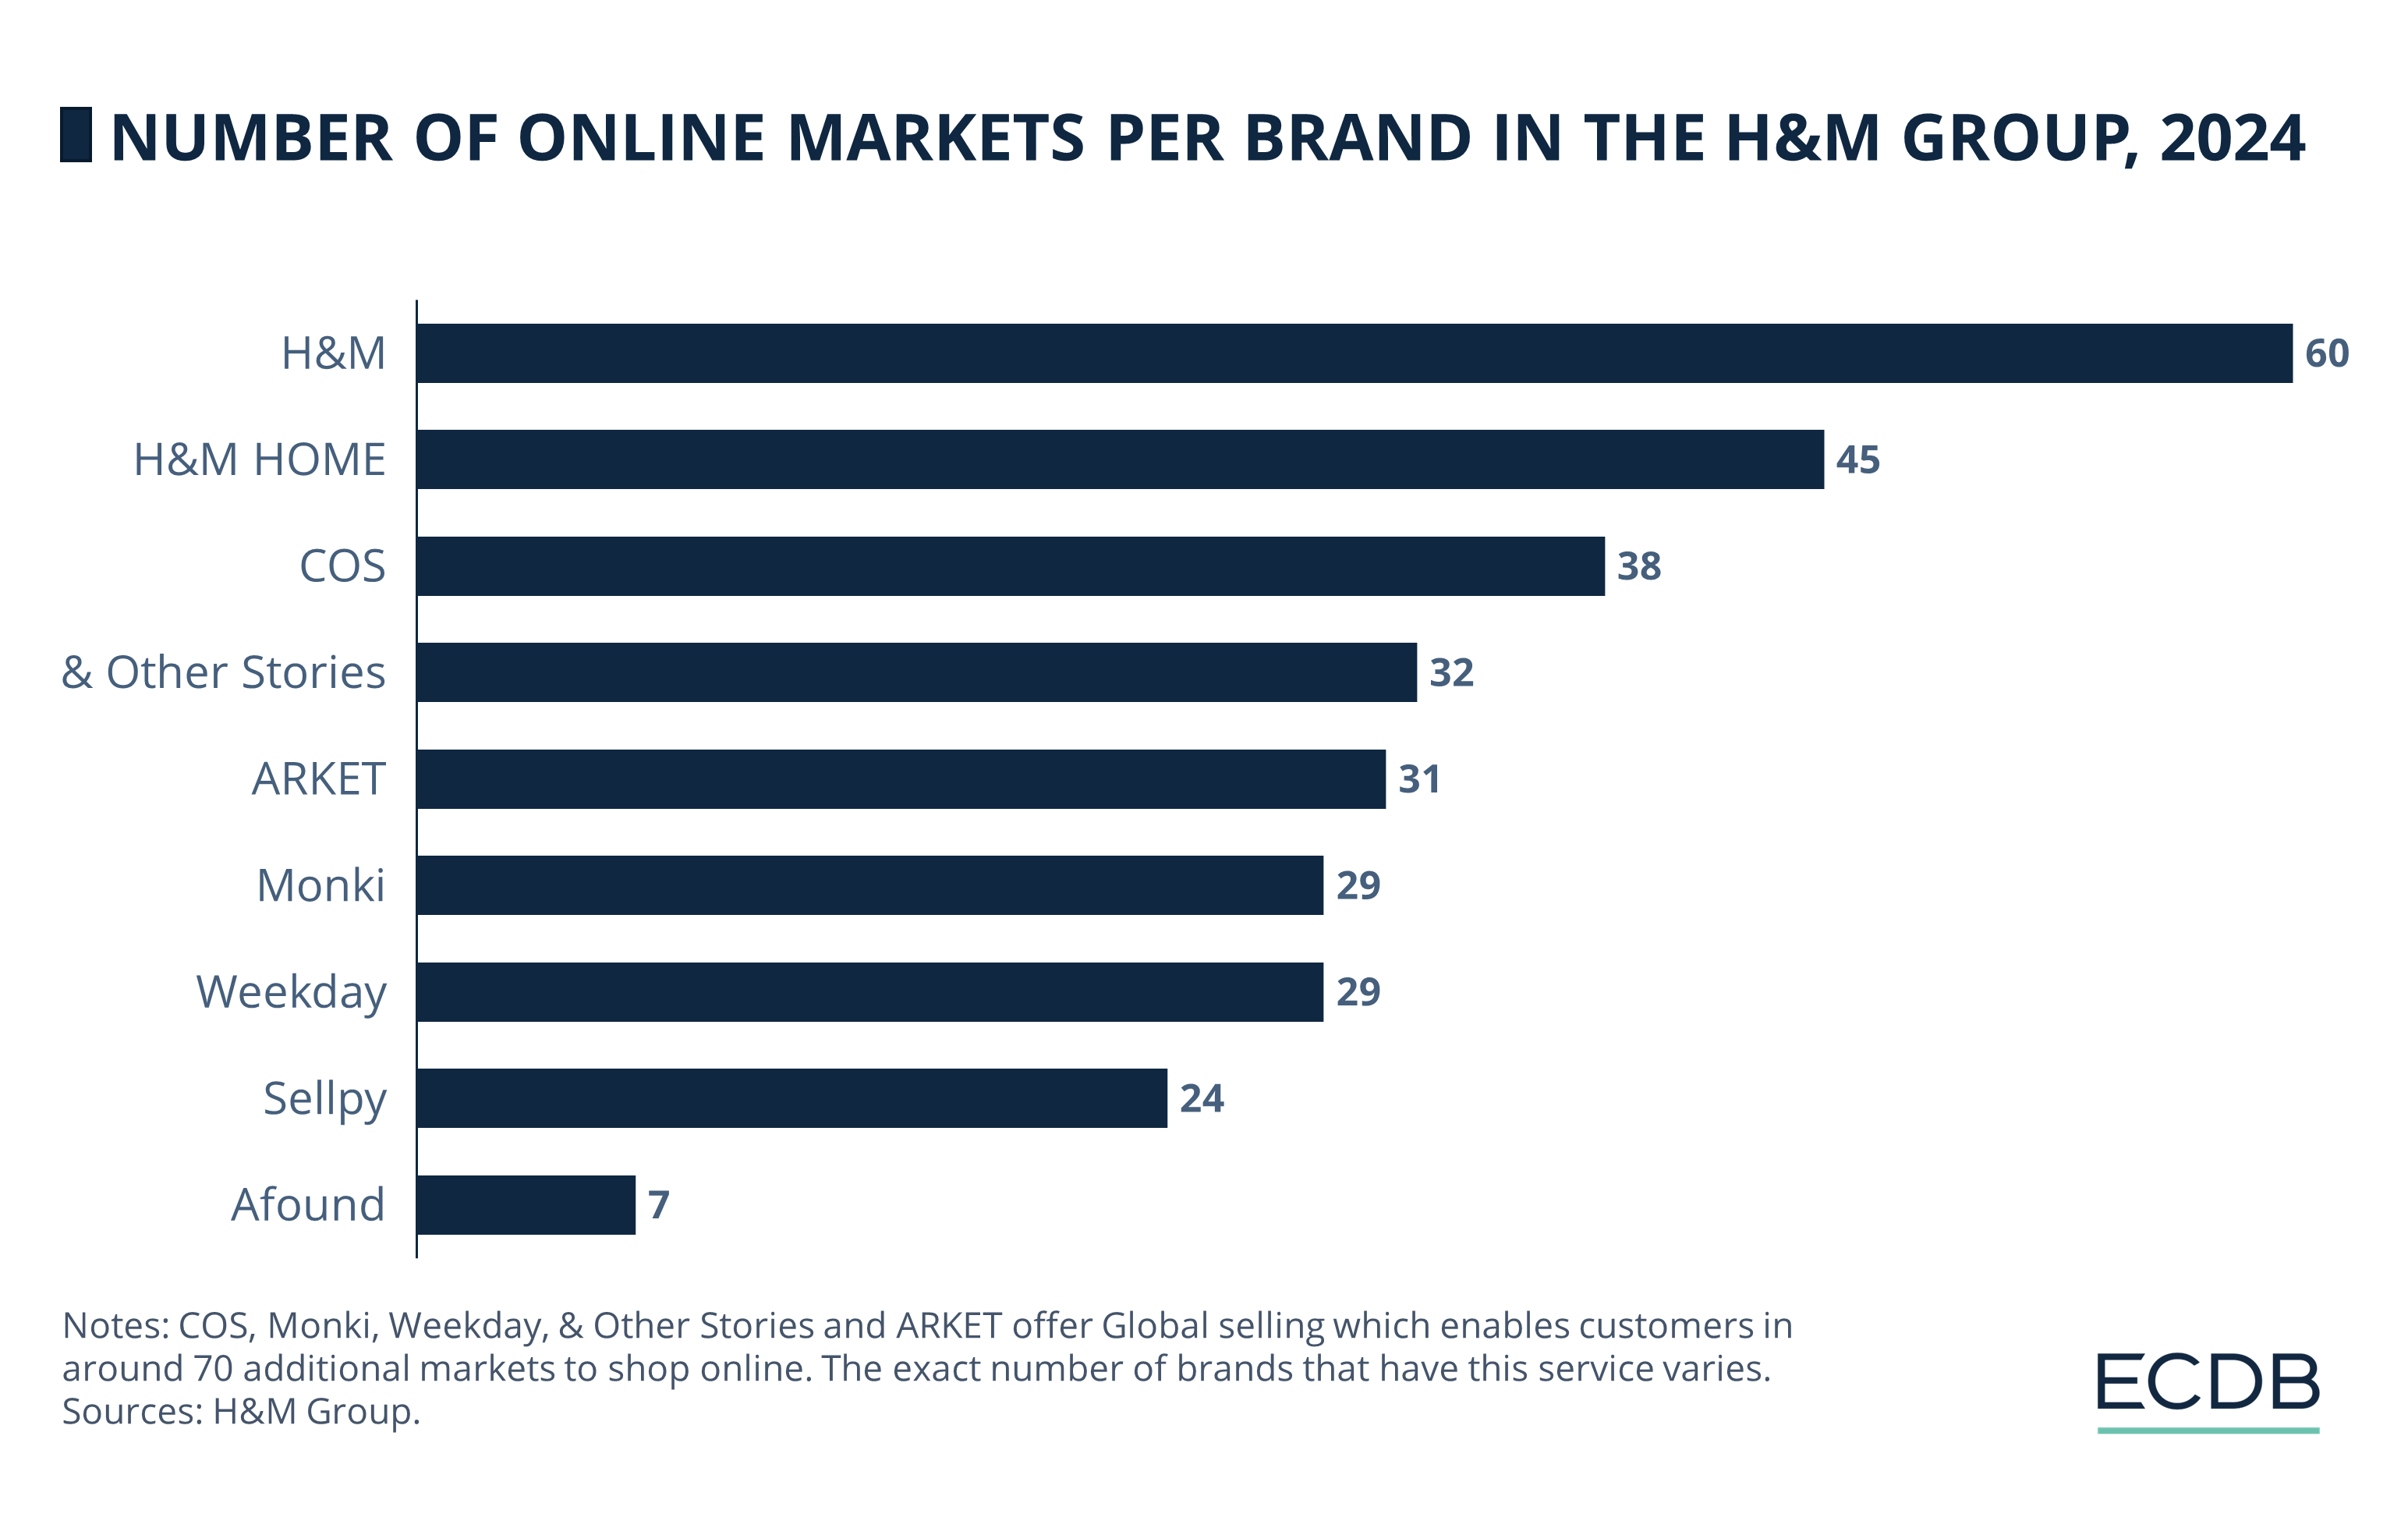 Number of Online Markets per Brand in the H&M Group, 2023